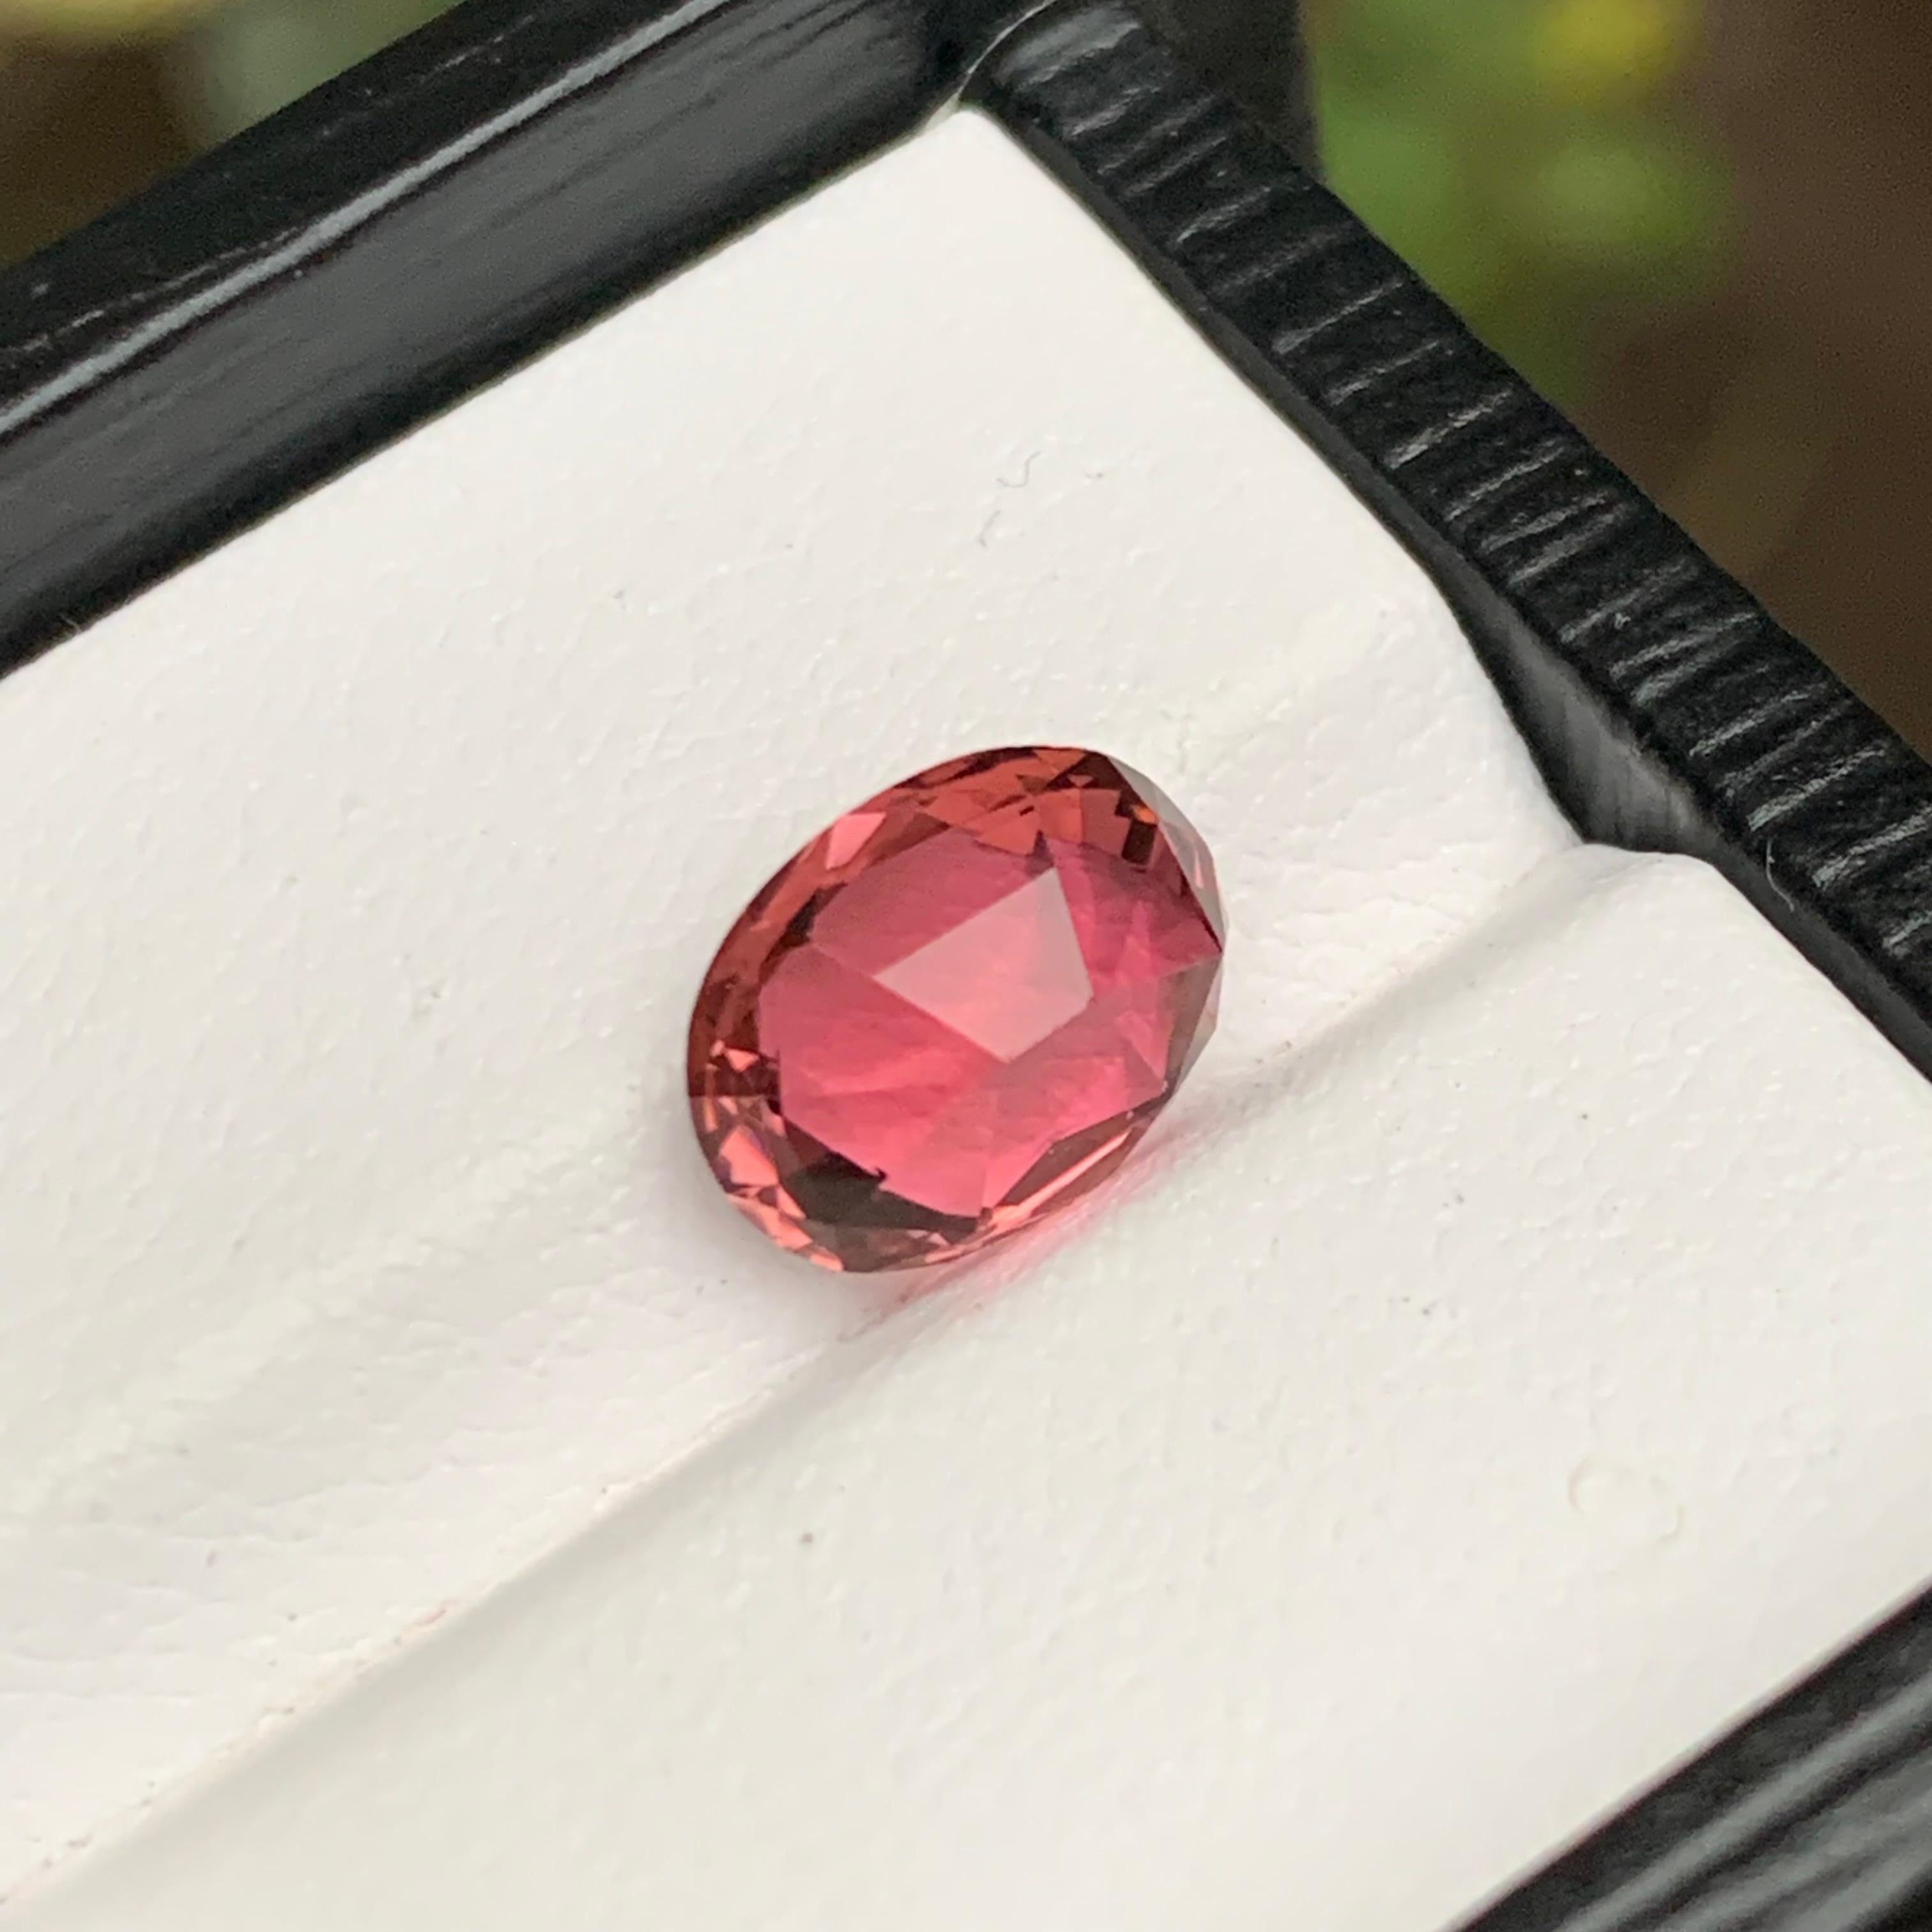 Rare Pink Natural Afghan Tourmaline Loose Gemstone, 2.75 Ct-Cushion Cut for ring For Sale 2